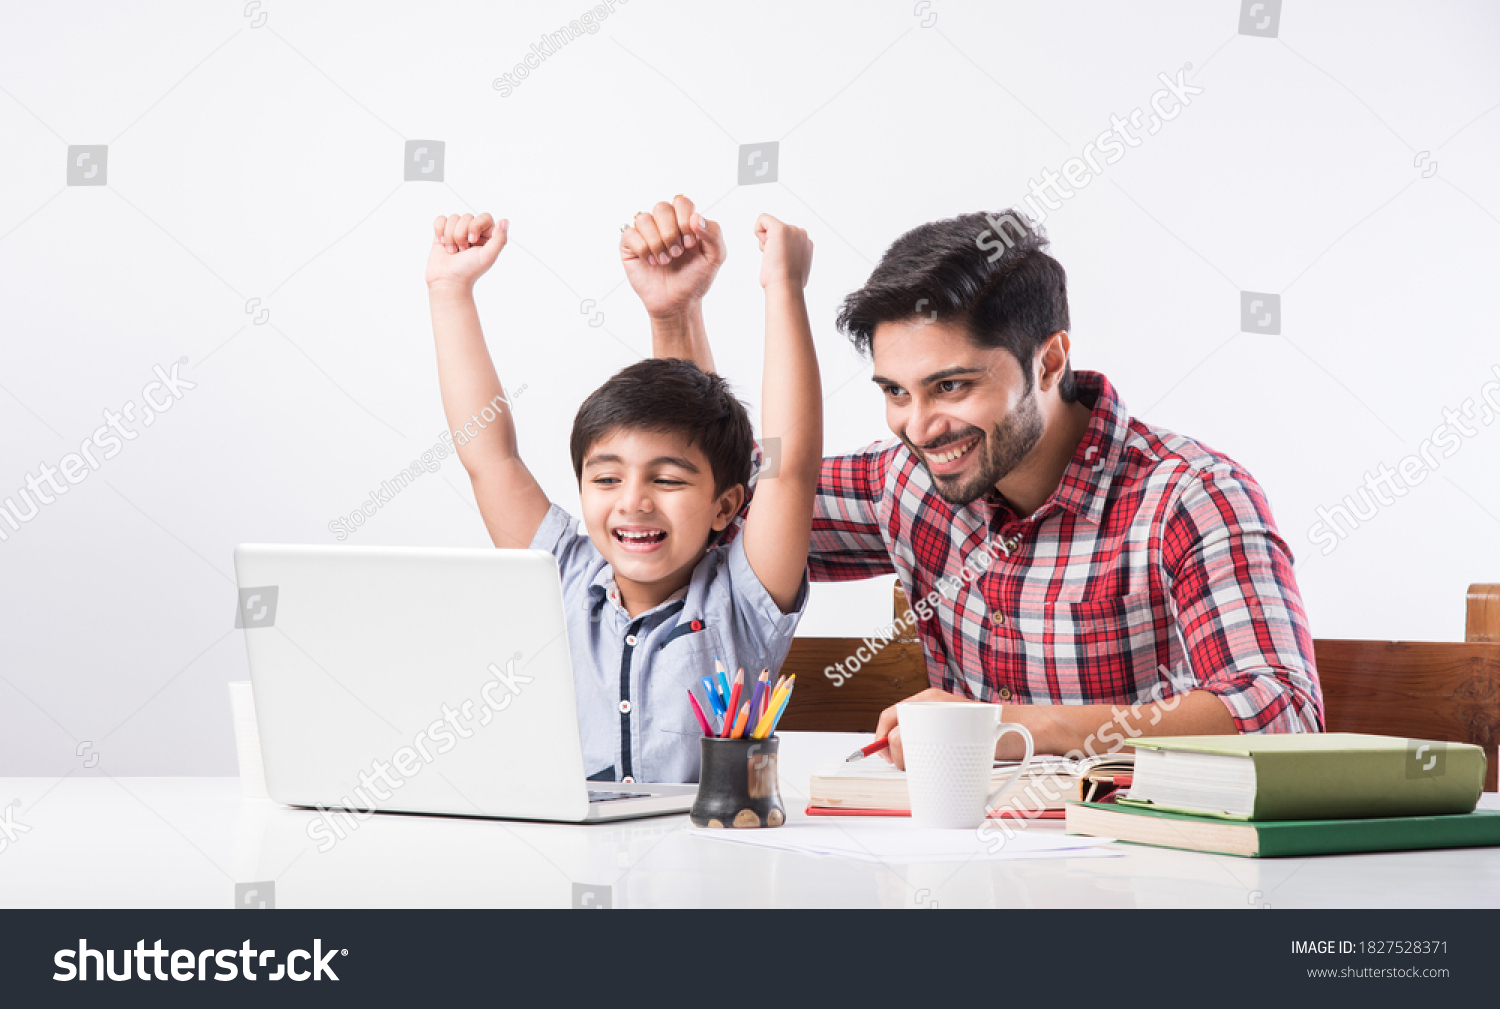 Indian kid studying online, attending school via e-learning with father #1827528371